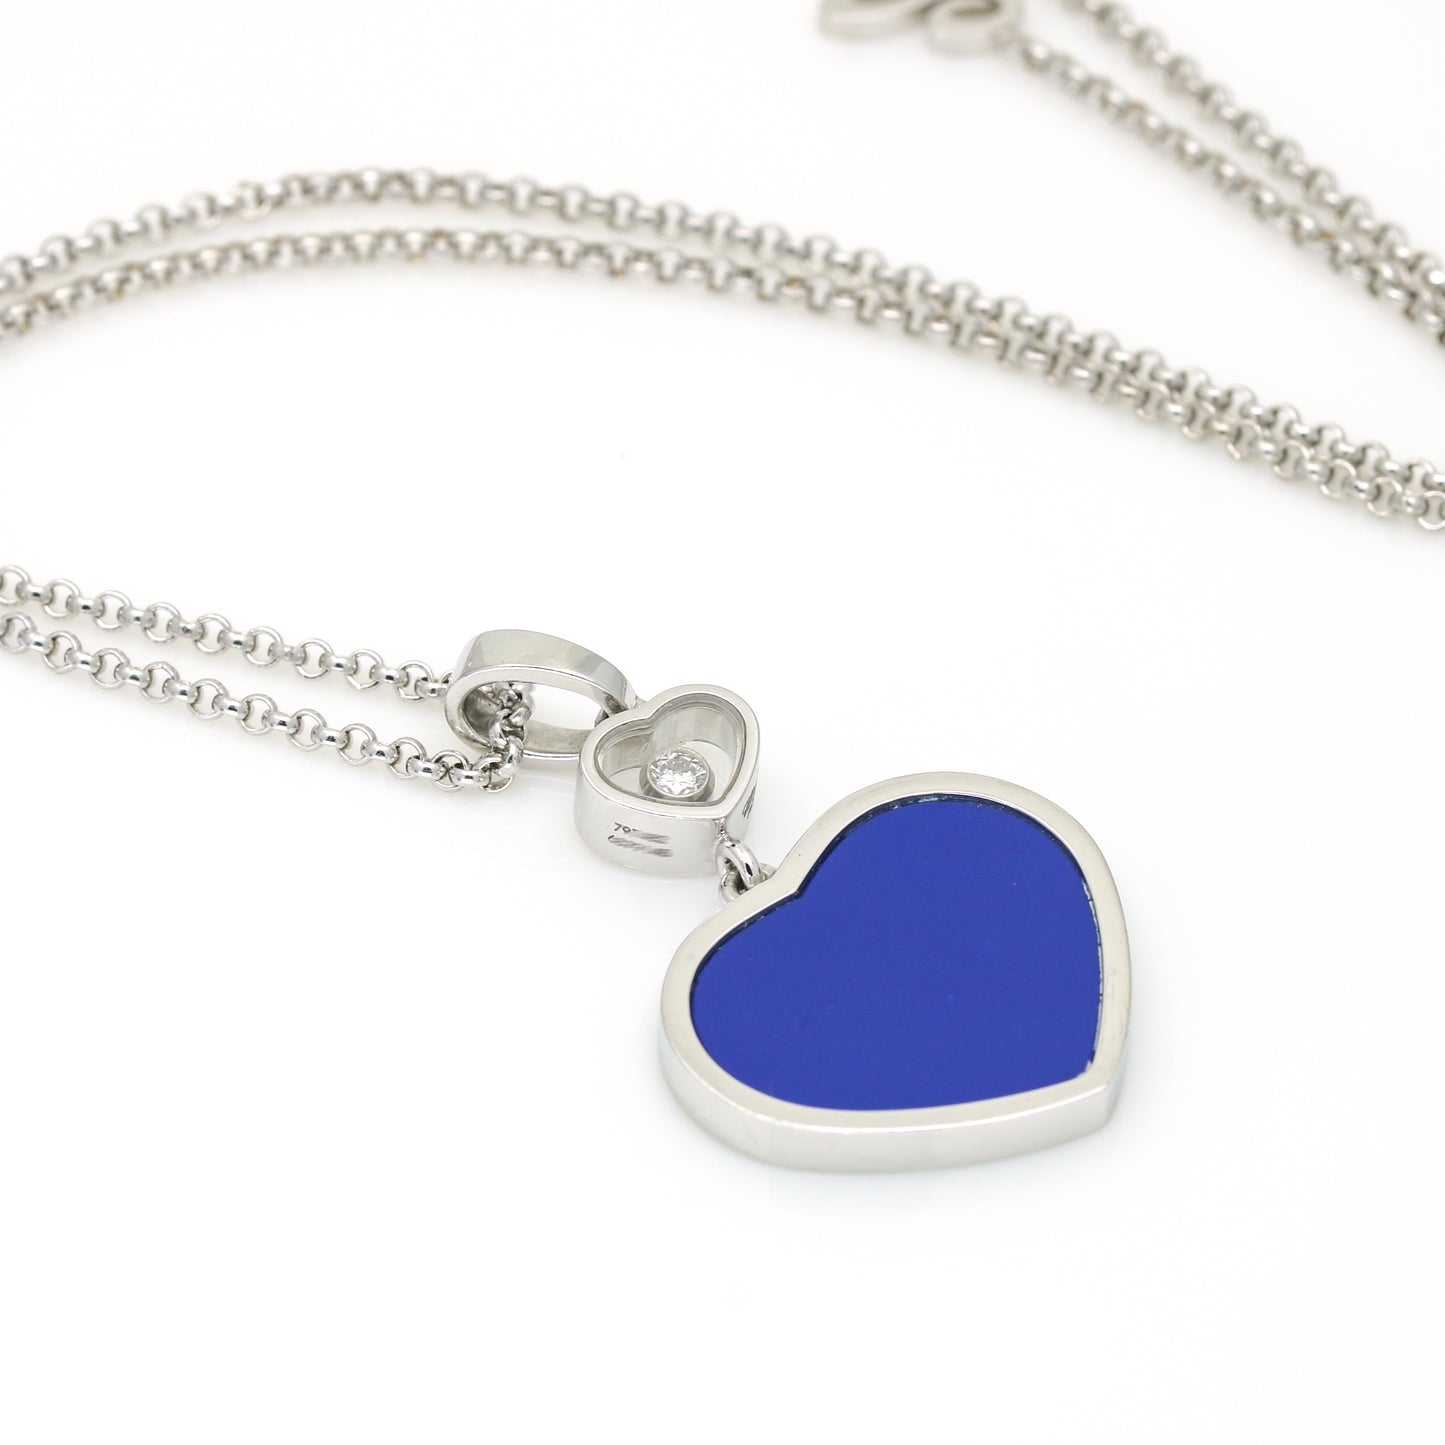 Chopard Happy Heart Pendant Necklace in 18k White Gold with Lapis Lazuli